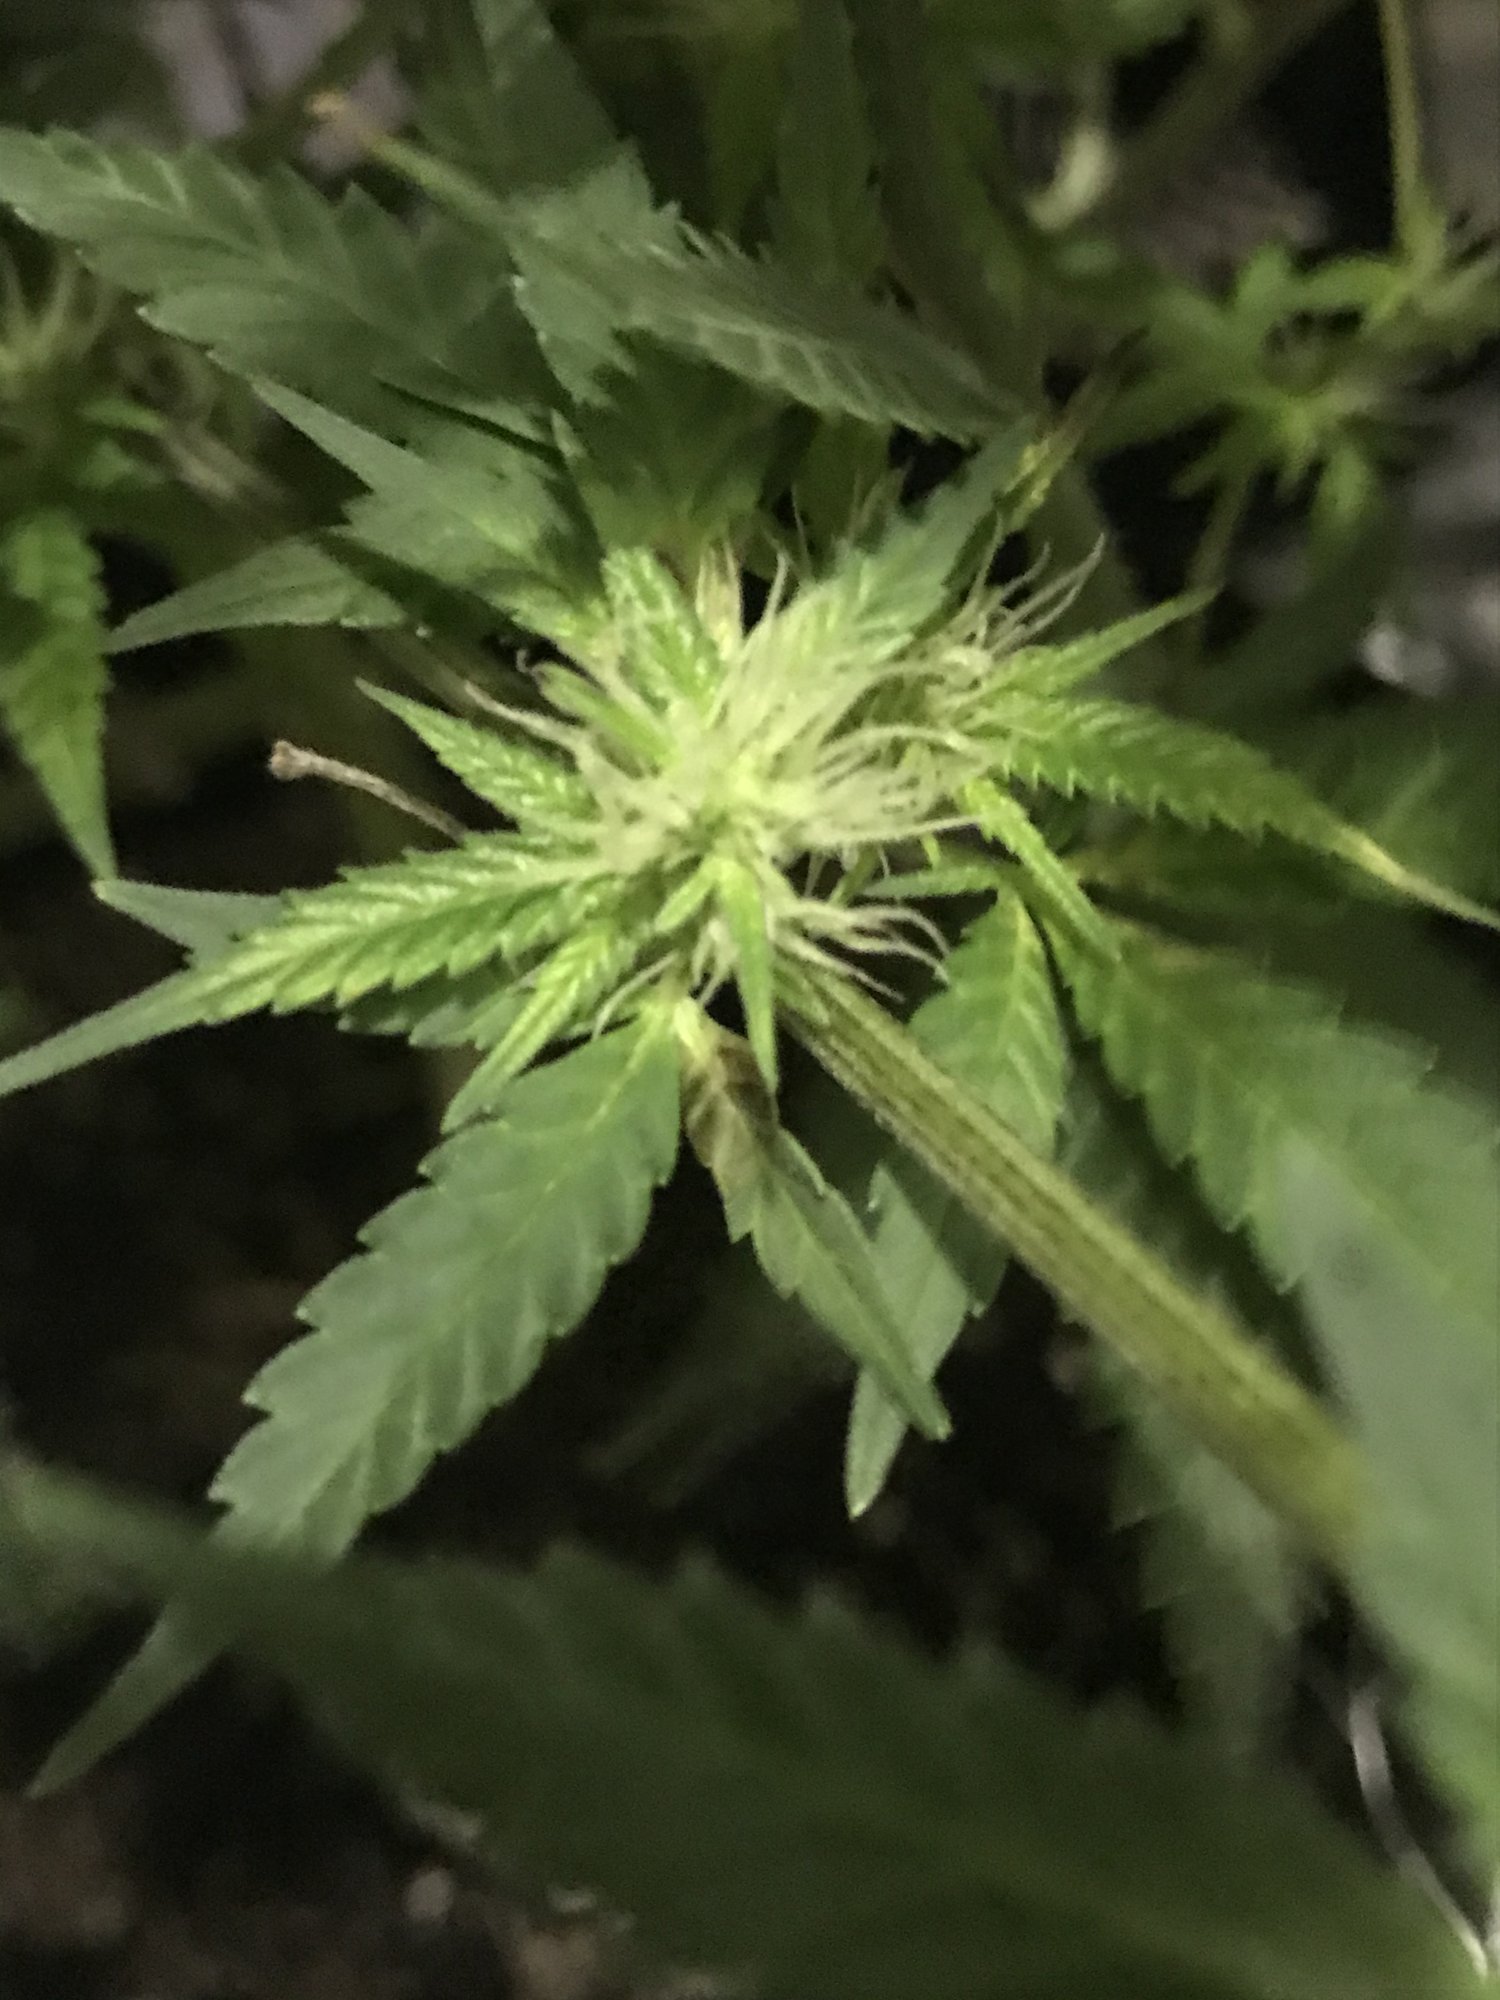 Weird browning on female plant wk3 of flower